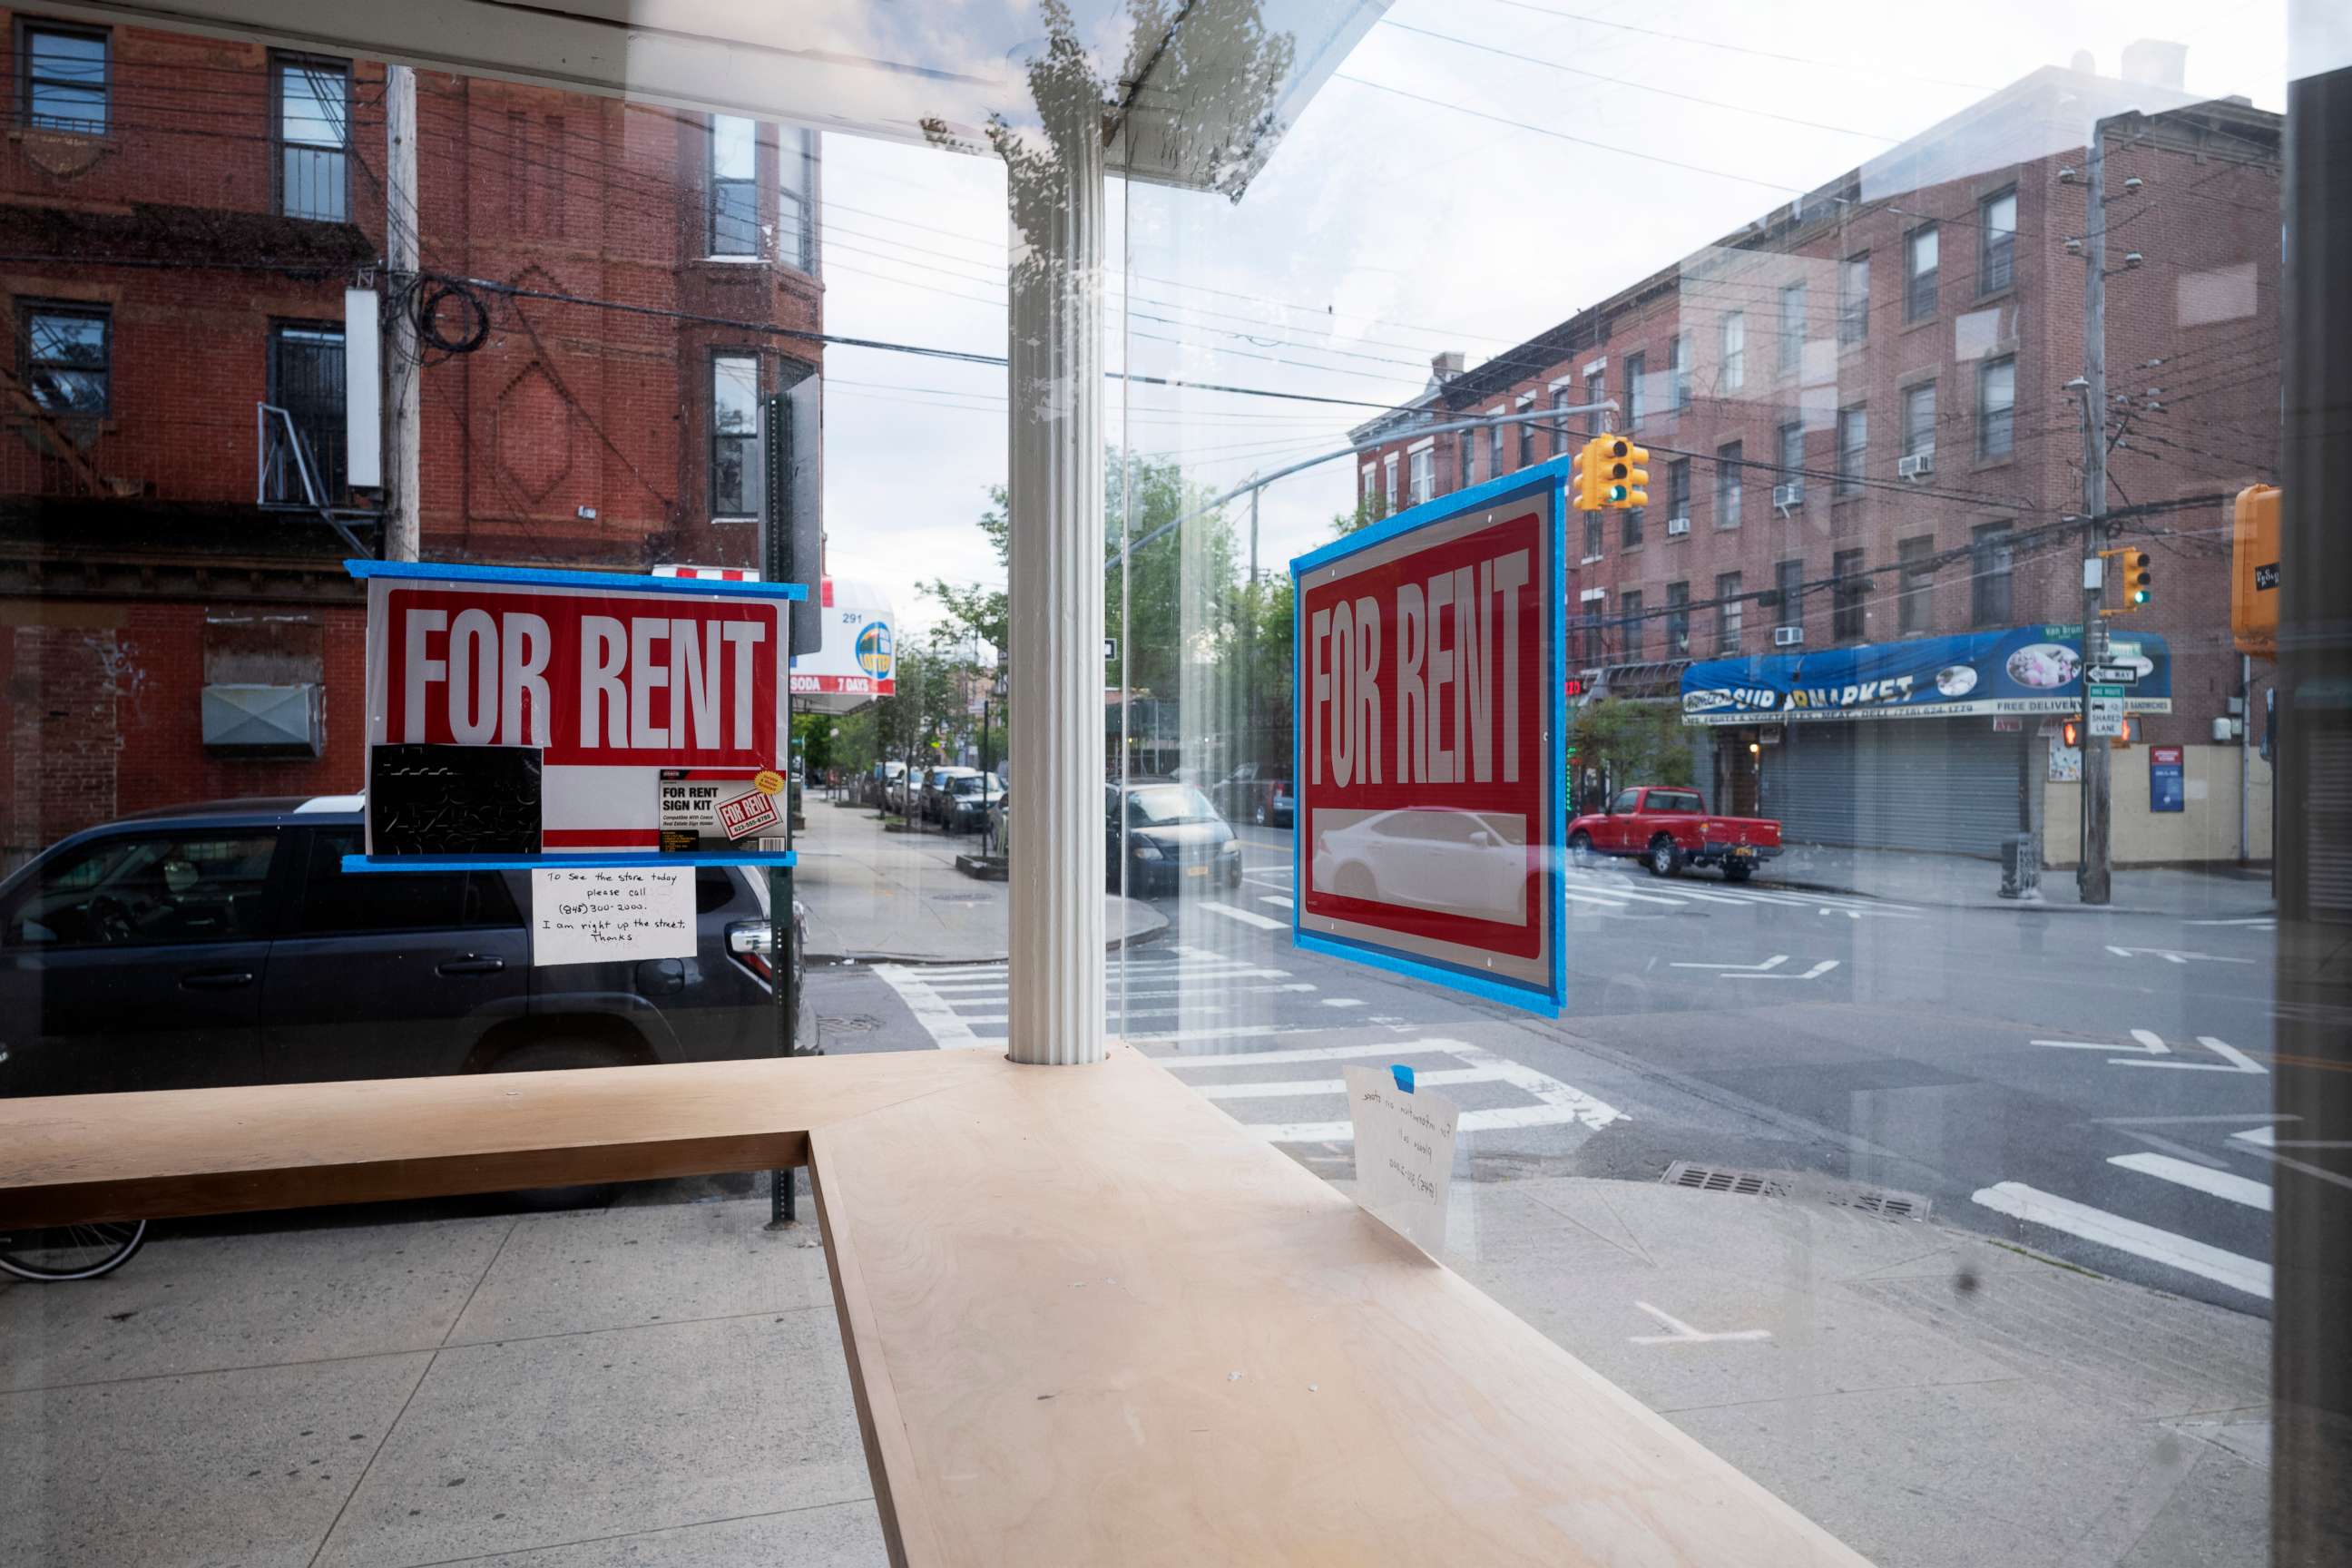 PHOTO: In this May 12, 2020 photo, a storefront displays "For Rent" signs in the window in the Red Hook neighborhood of the Brooklyn borough of New York.